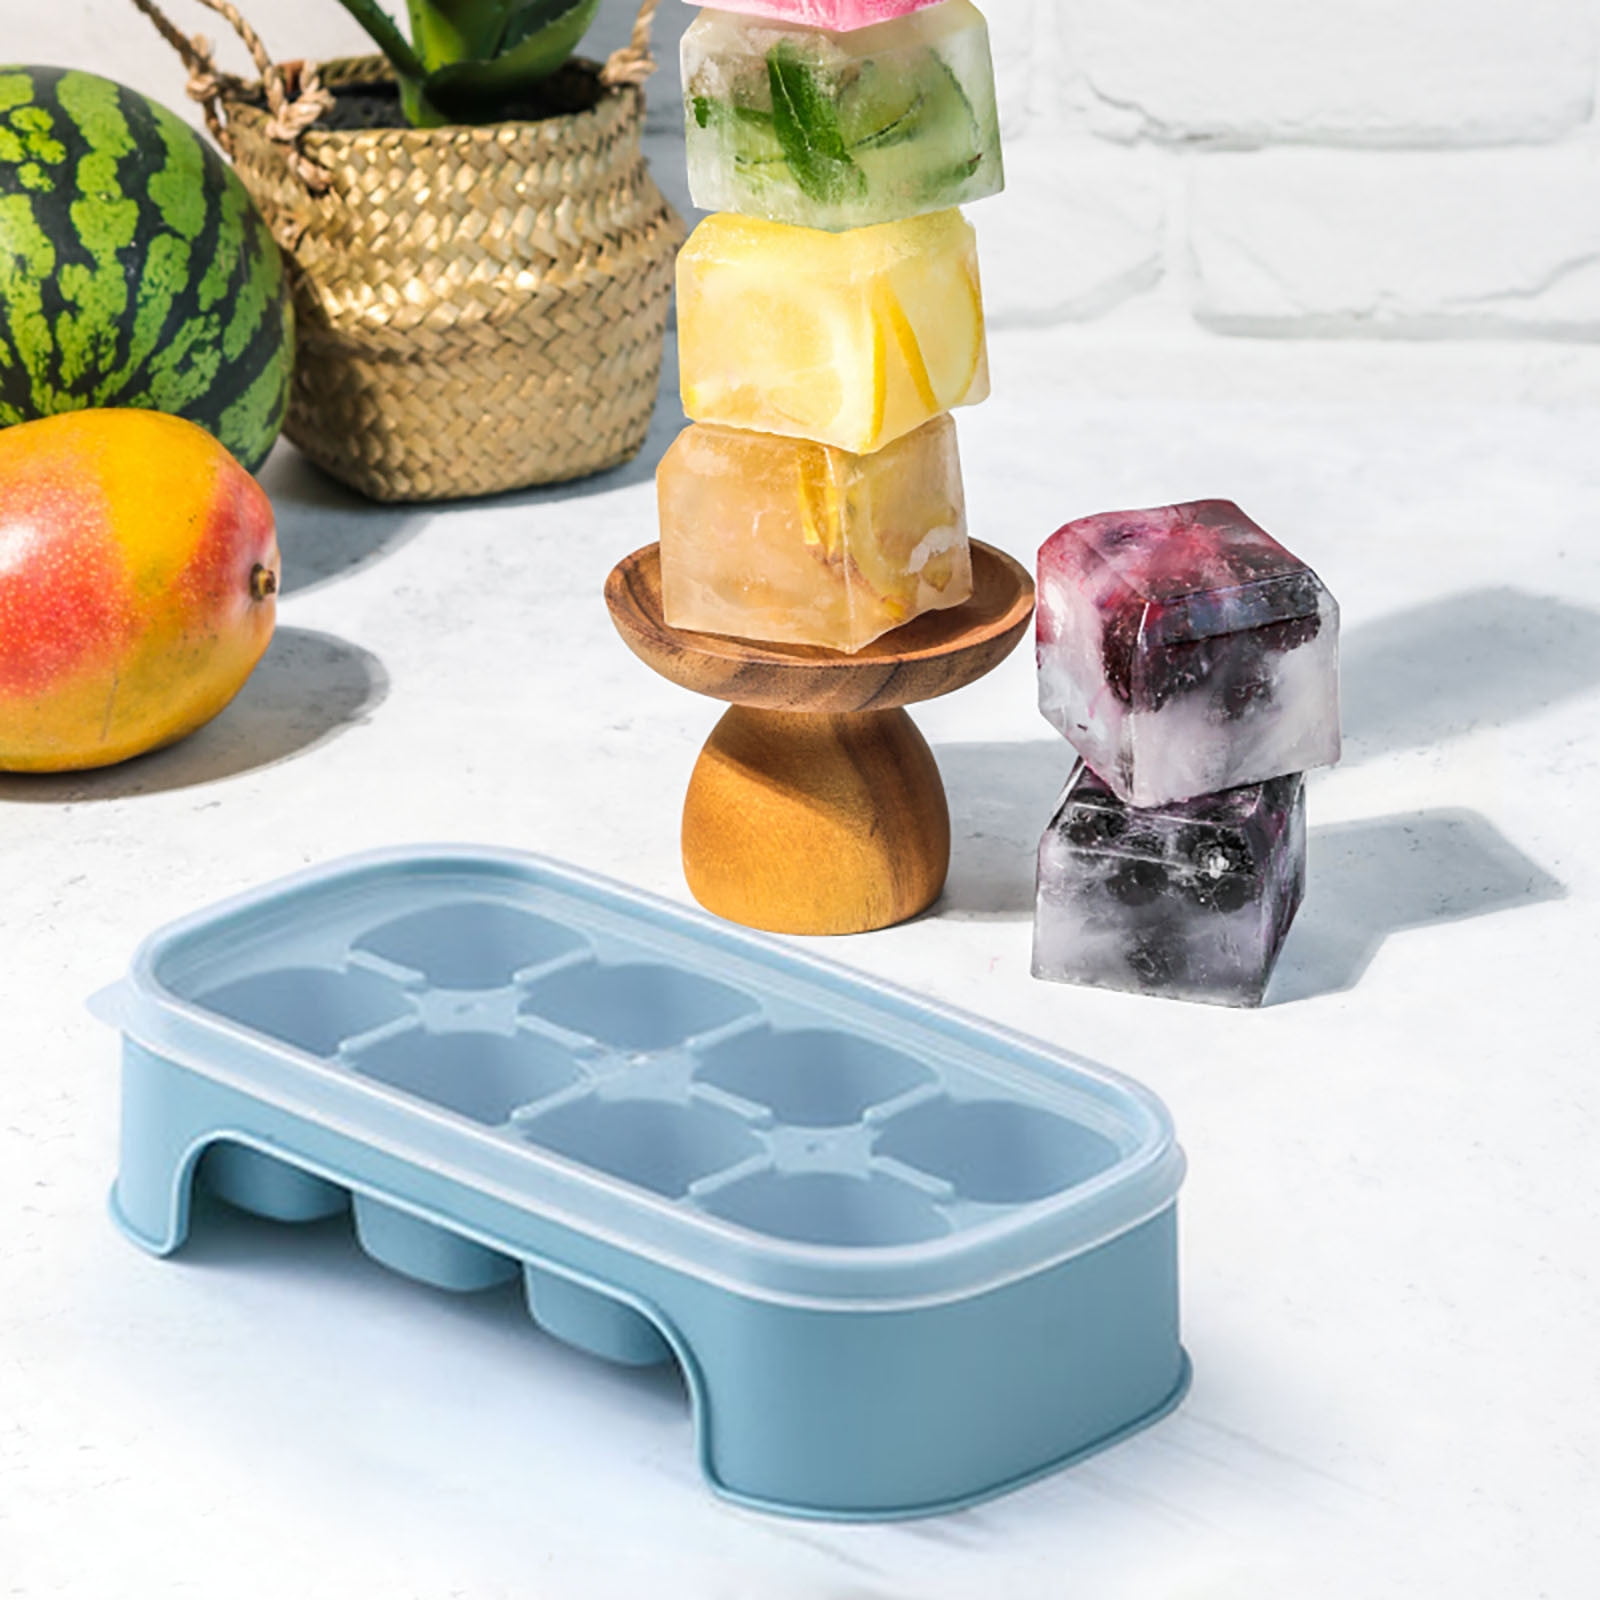 This ice cube tray is perfect for crowded freezers—and it's only $10